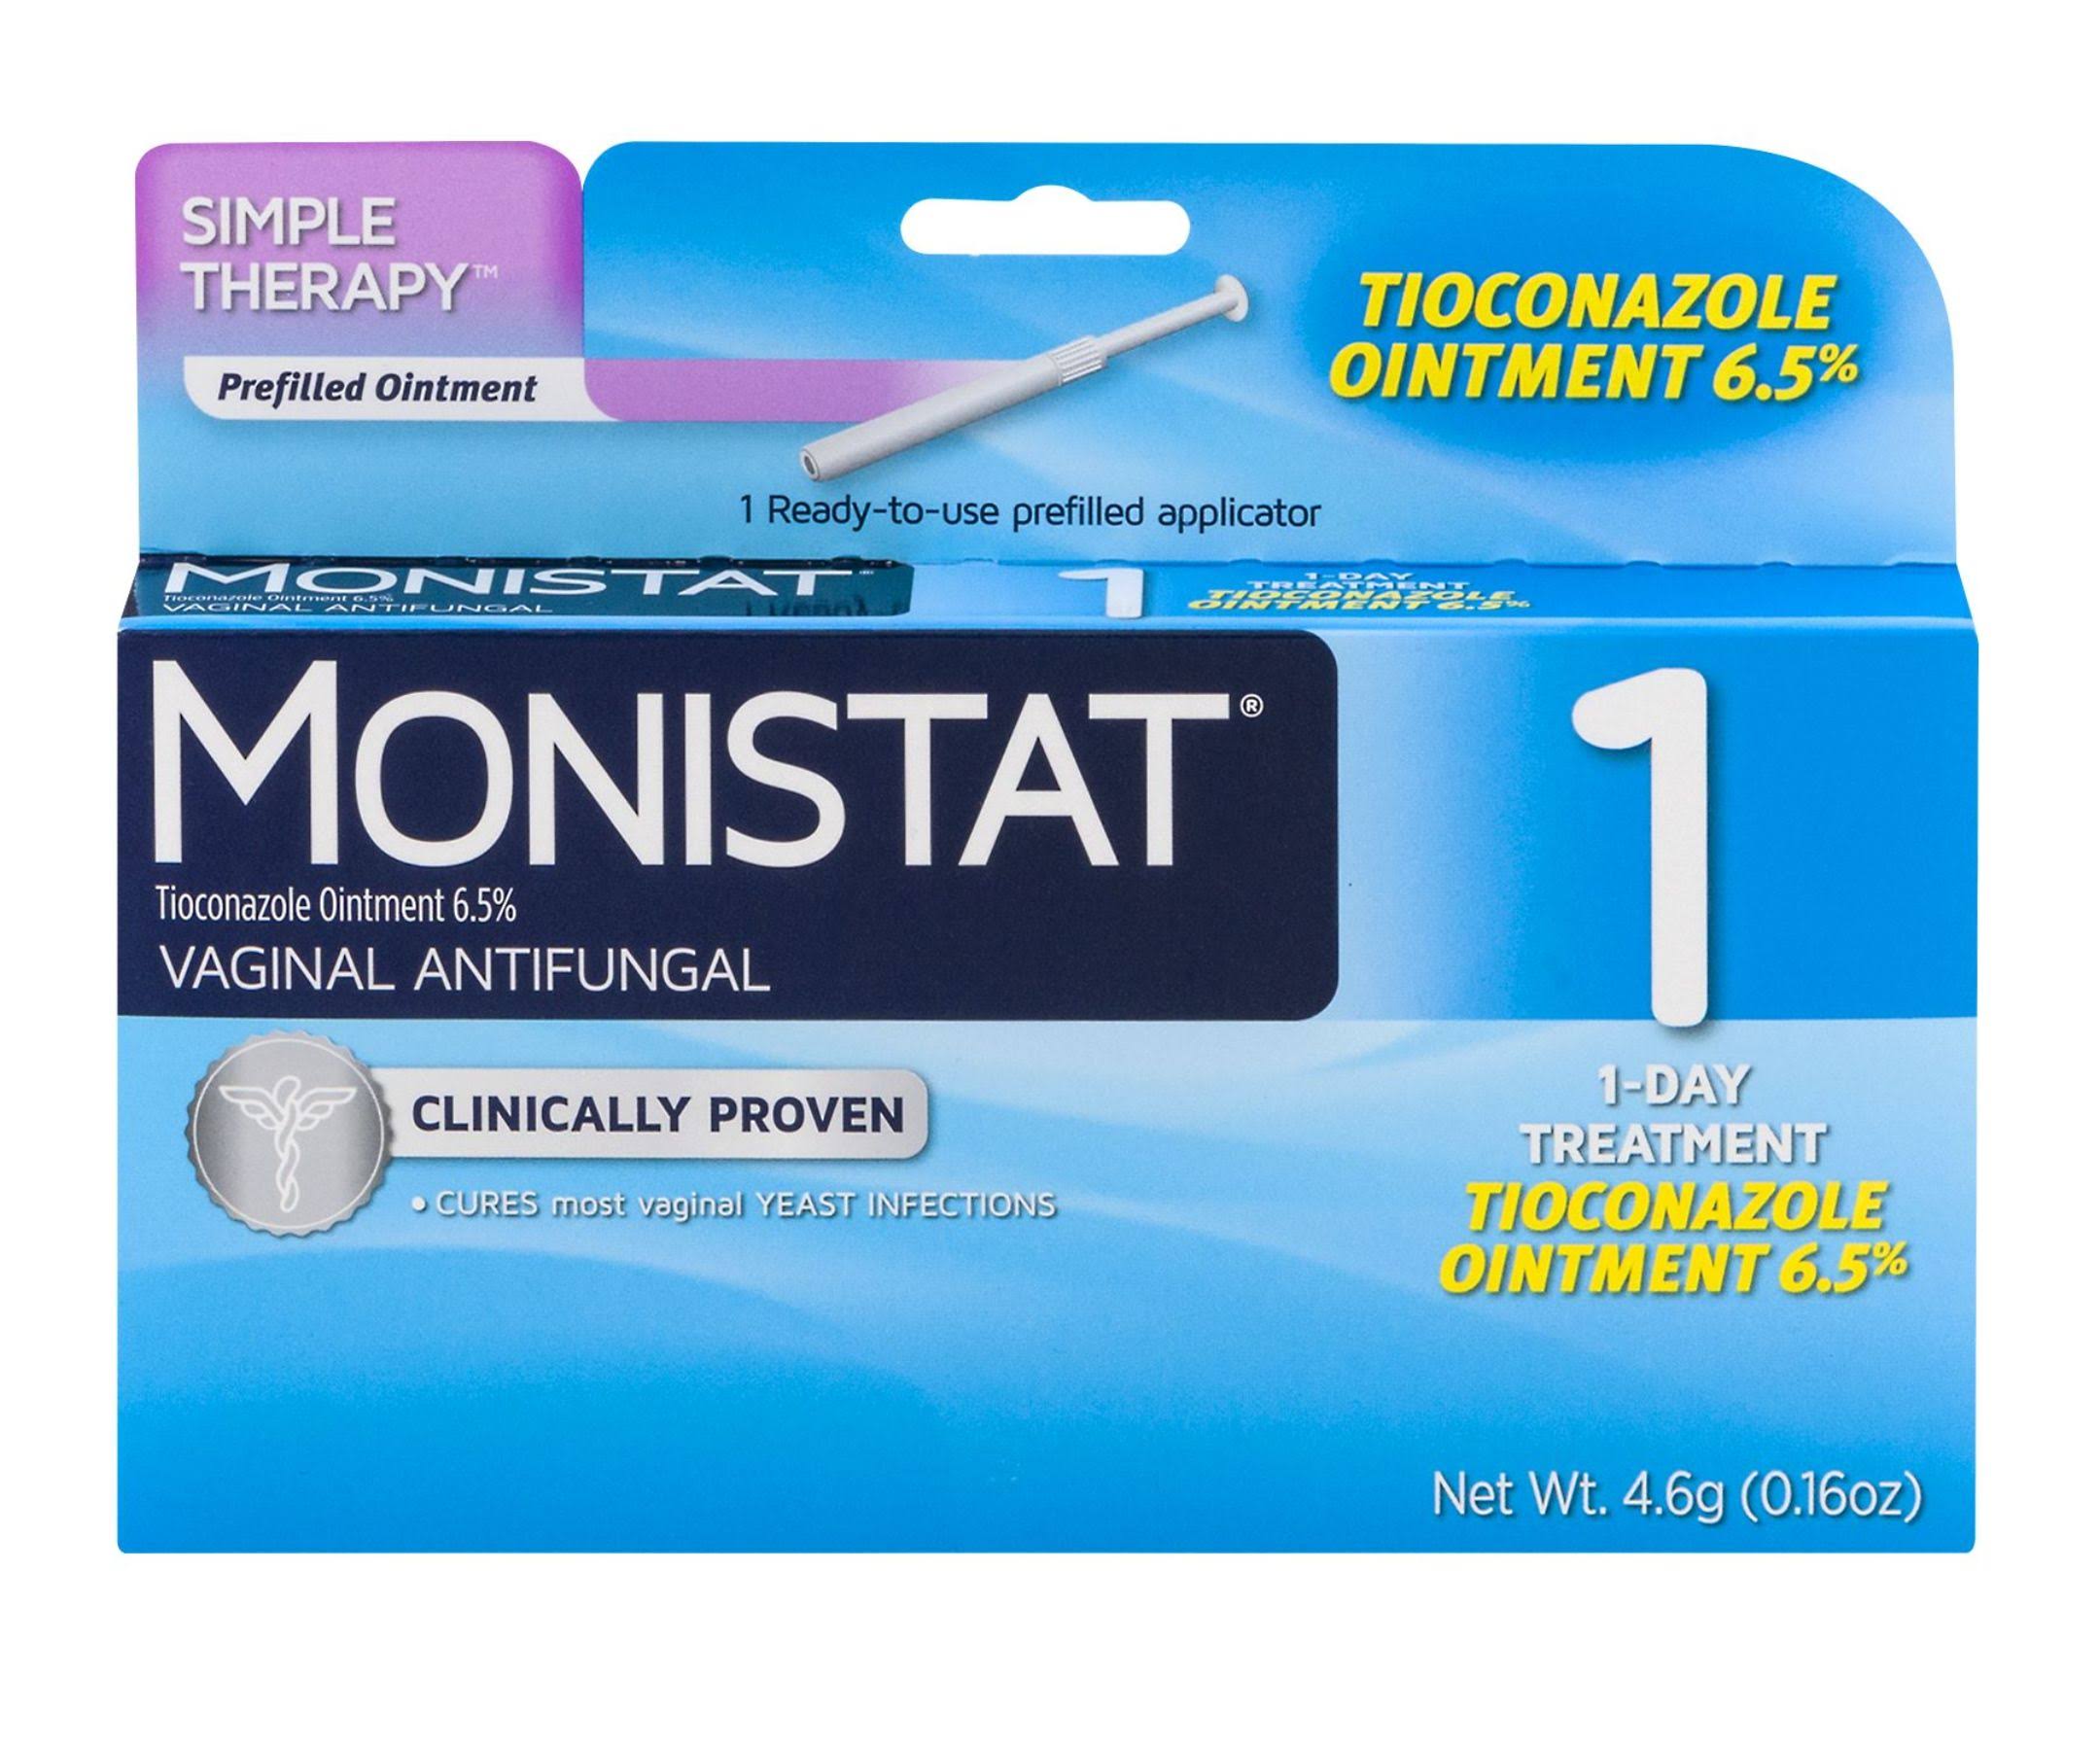 Monistat Simple Therapy Vaginal Antifungal - 4.6g